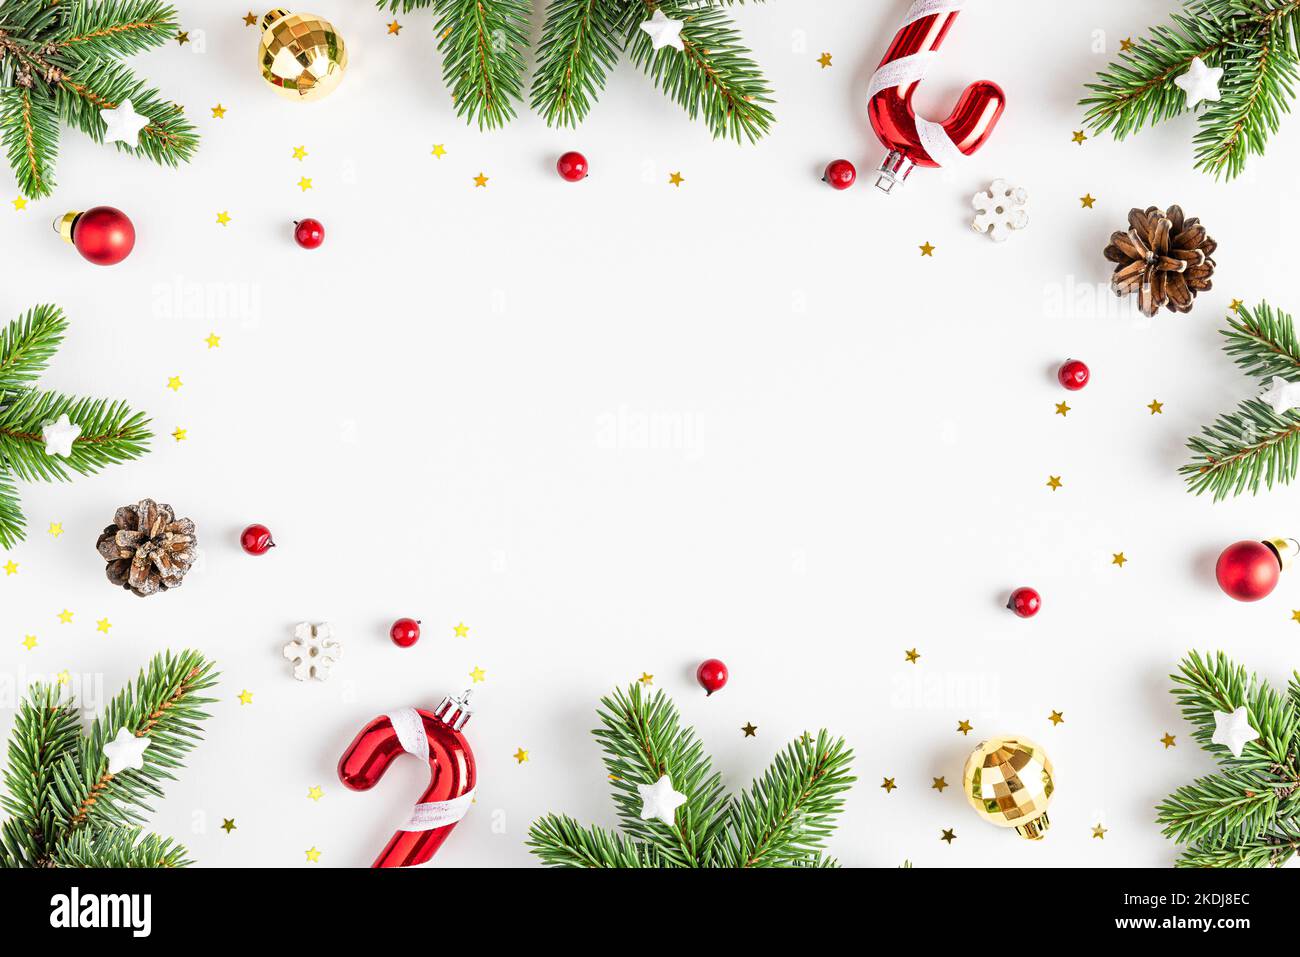 Christmas composition. Frame made of fir tree branches, holiday decorations on white background. Flat lay. Top view with copy space Stock Photo